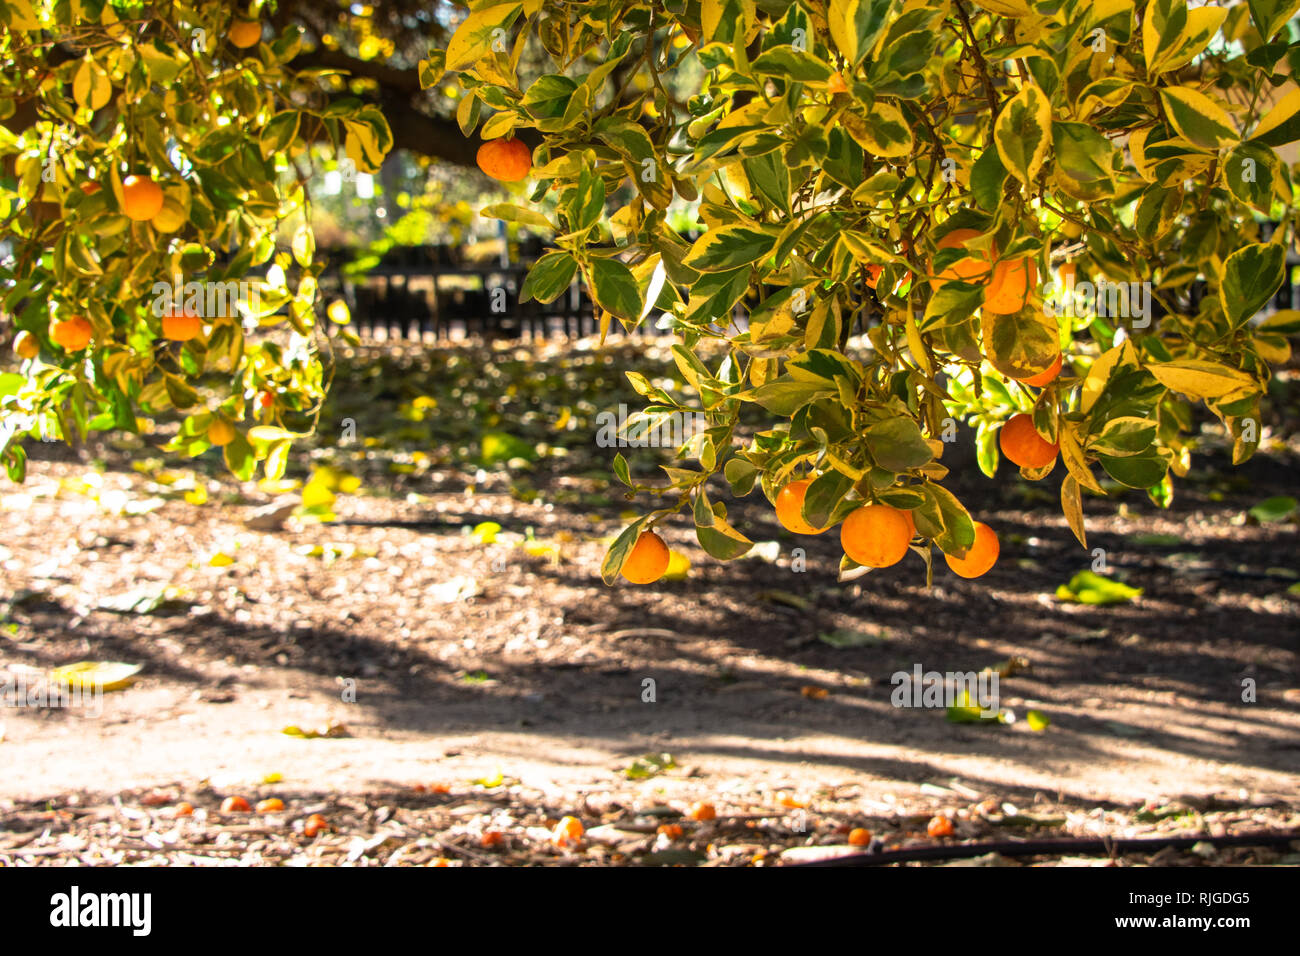 Calamondin oranges growing on tree branches close to the ground on a sunny day Stock Photo